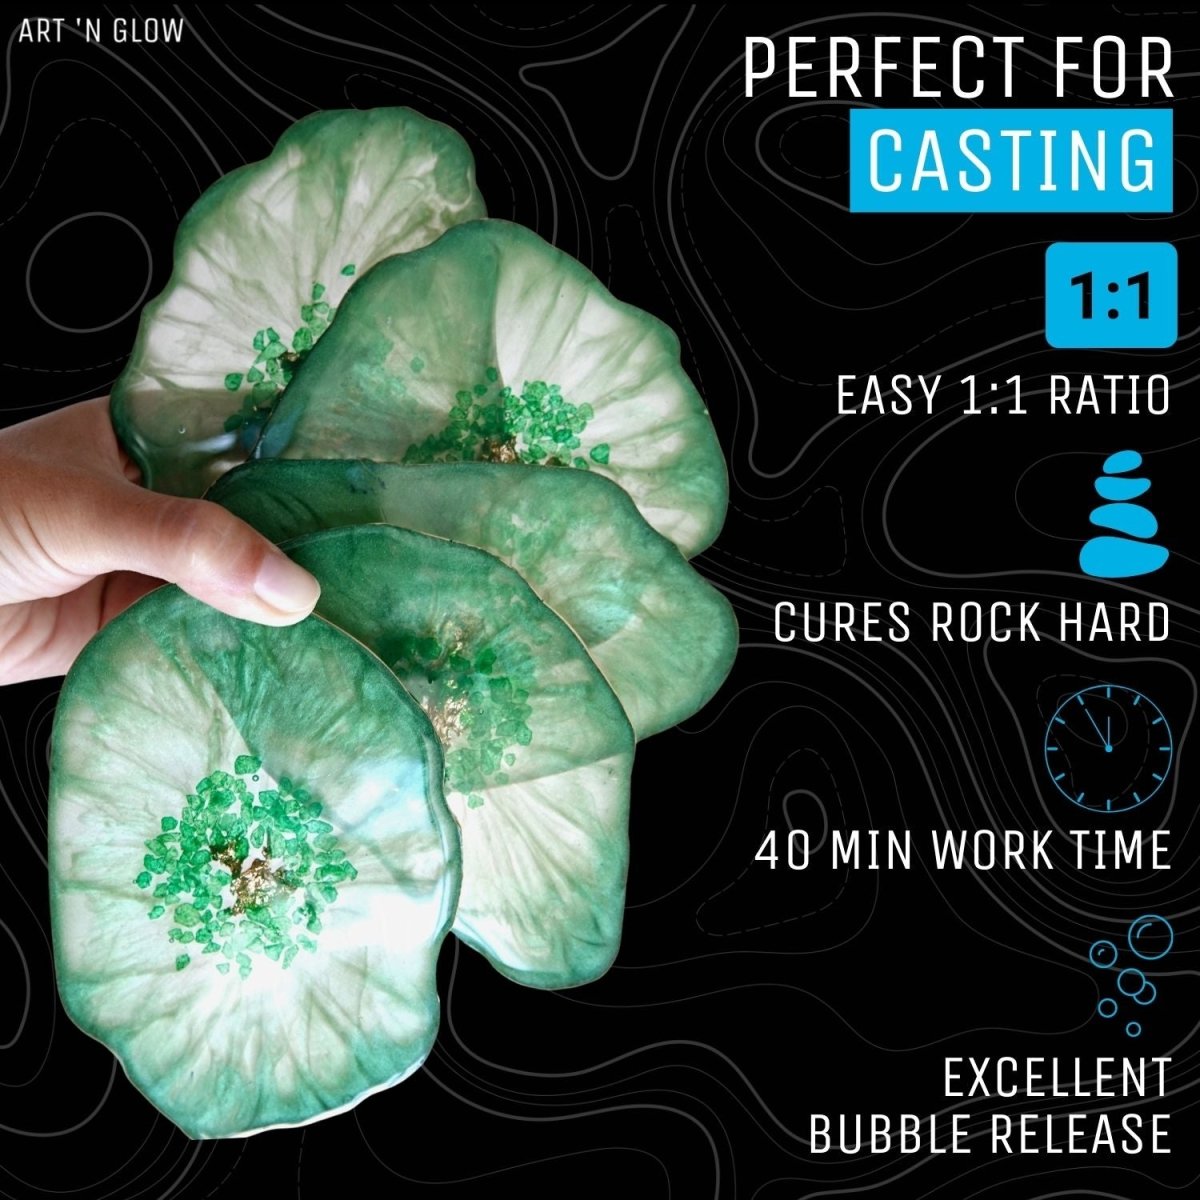 1 to 1 ratio, rock hard cure, 40 minute work time, excellent bubble release epoxy resin